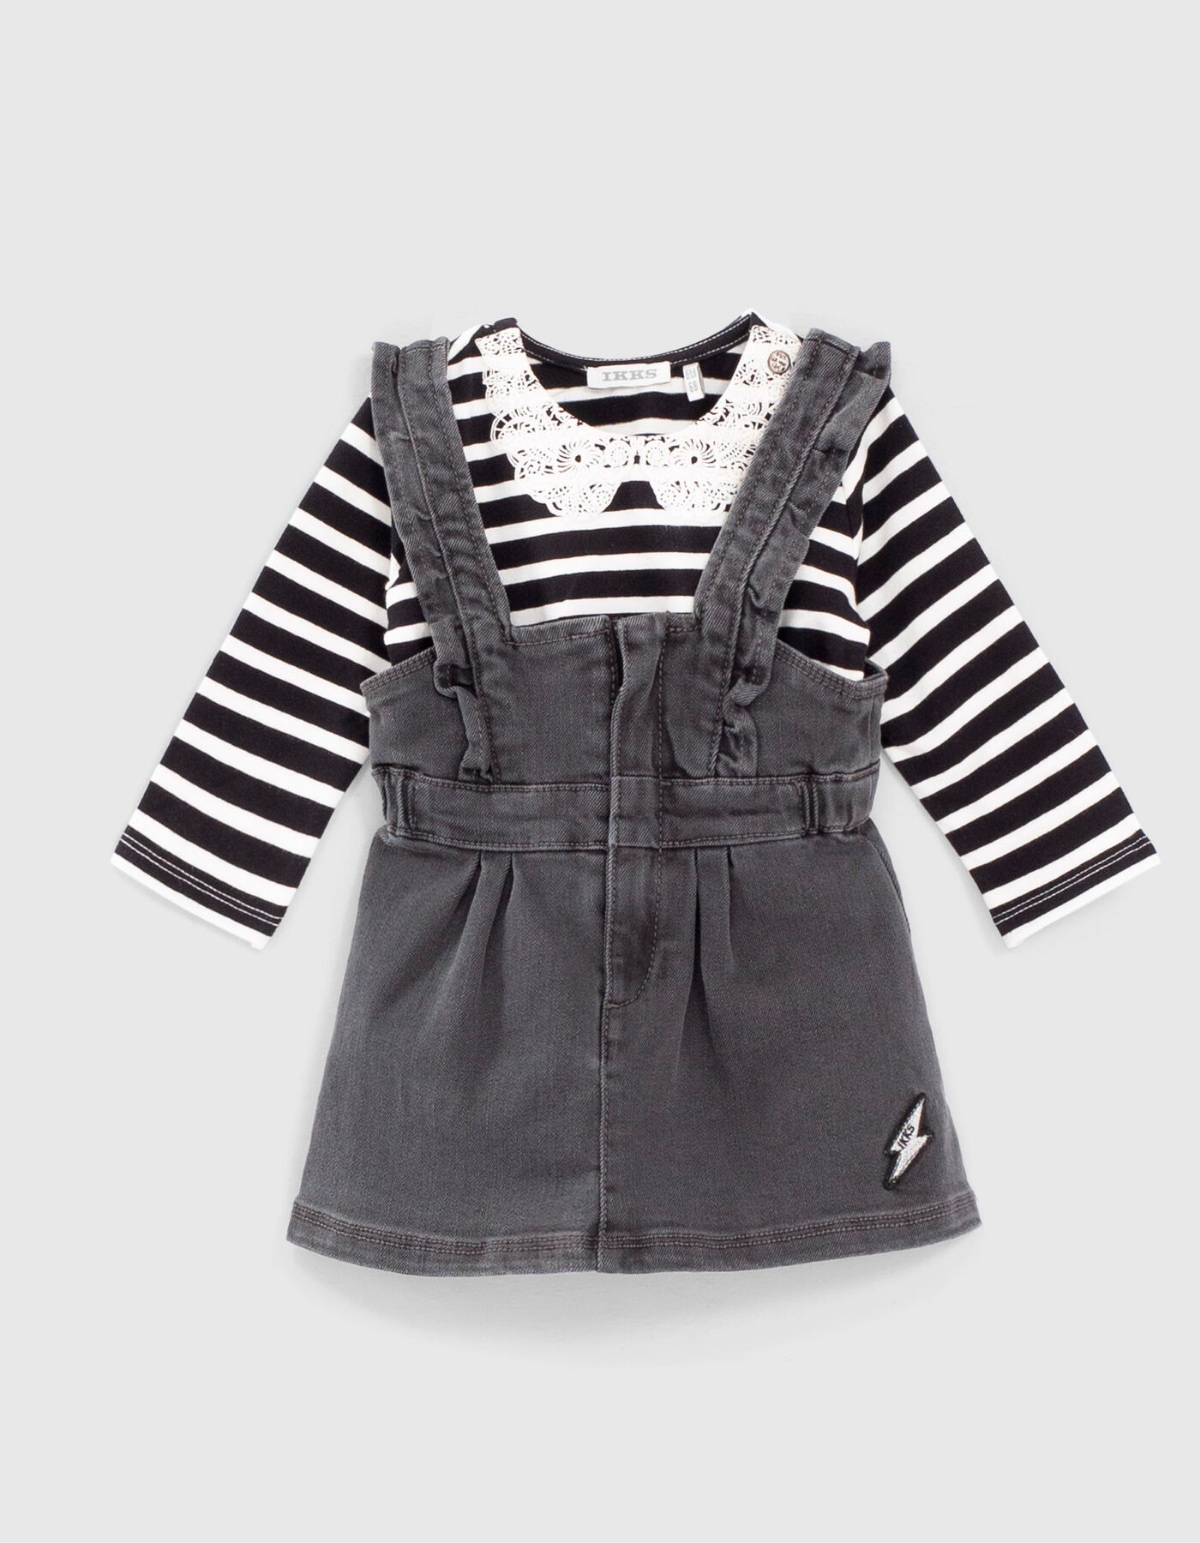 Baby girls’ striped T-shirt and grey denim dress outfit